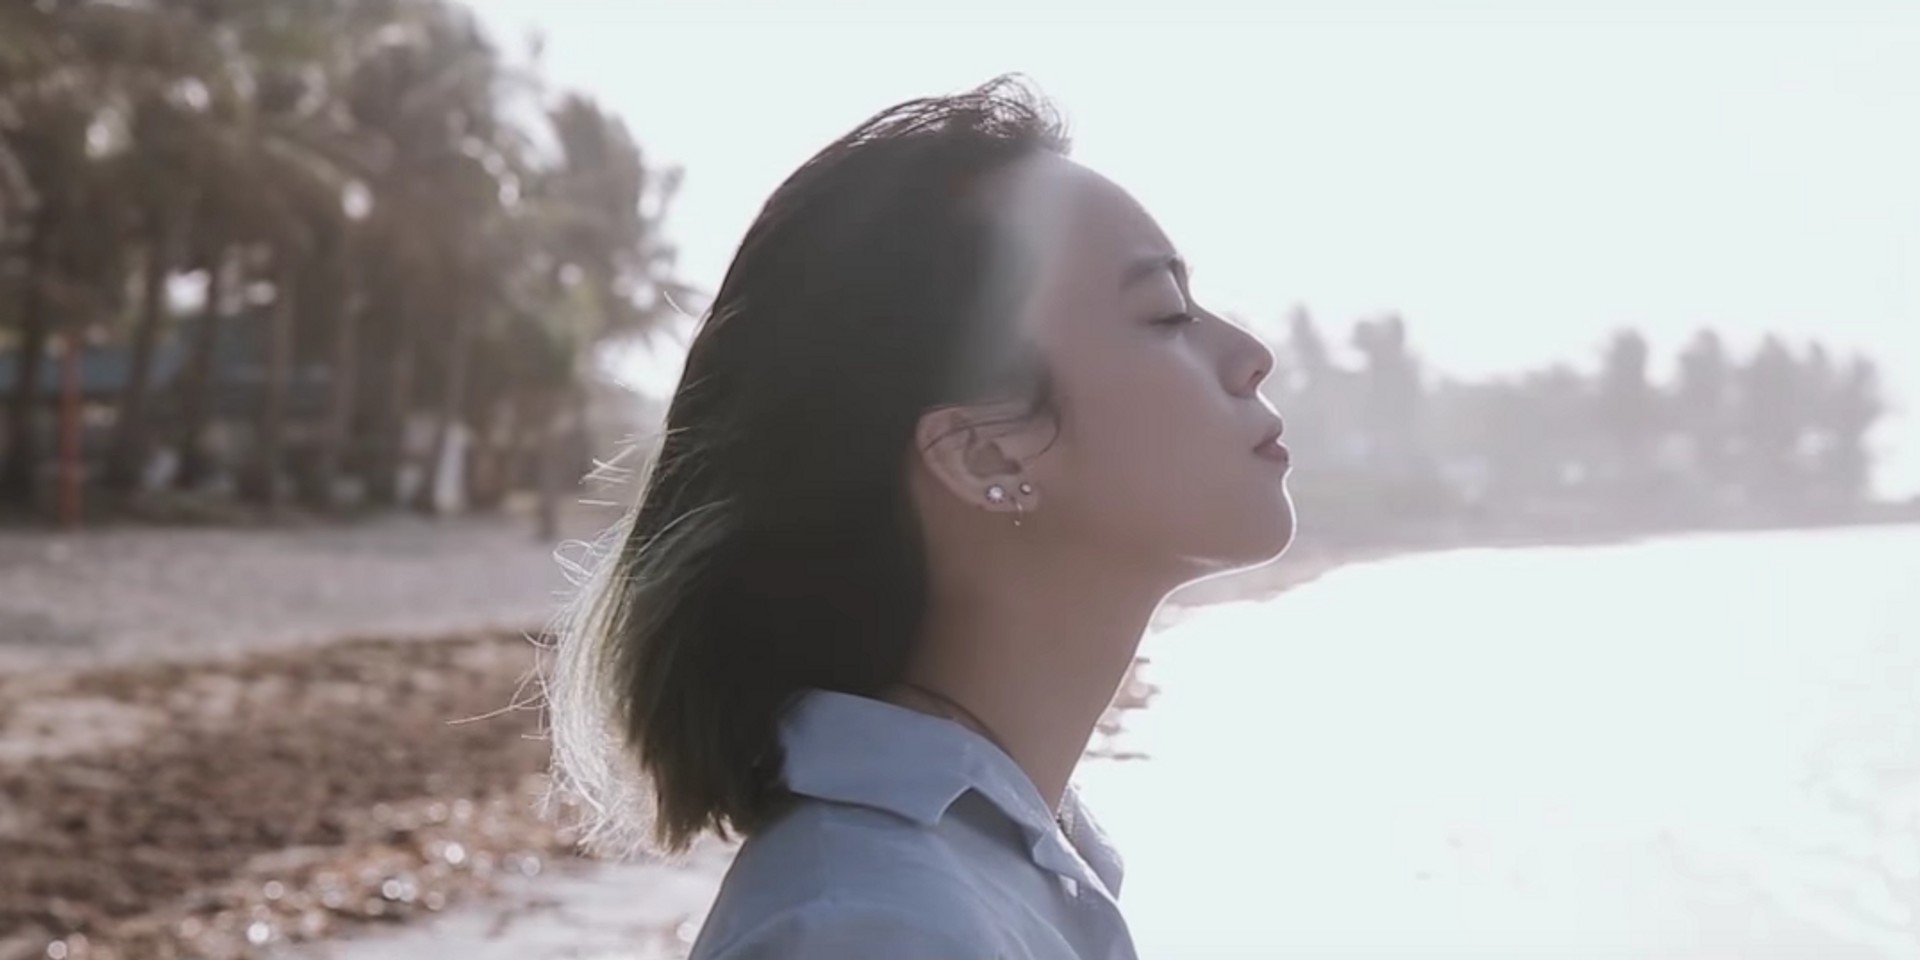 WATCH: Reese Lansangan teams up with Tripkada and Explore Philippines for "St. Petersburg" music video